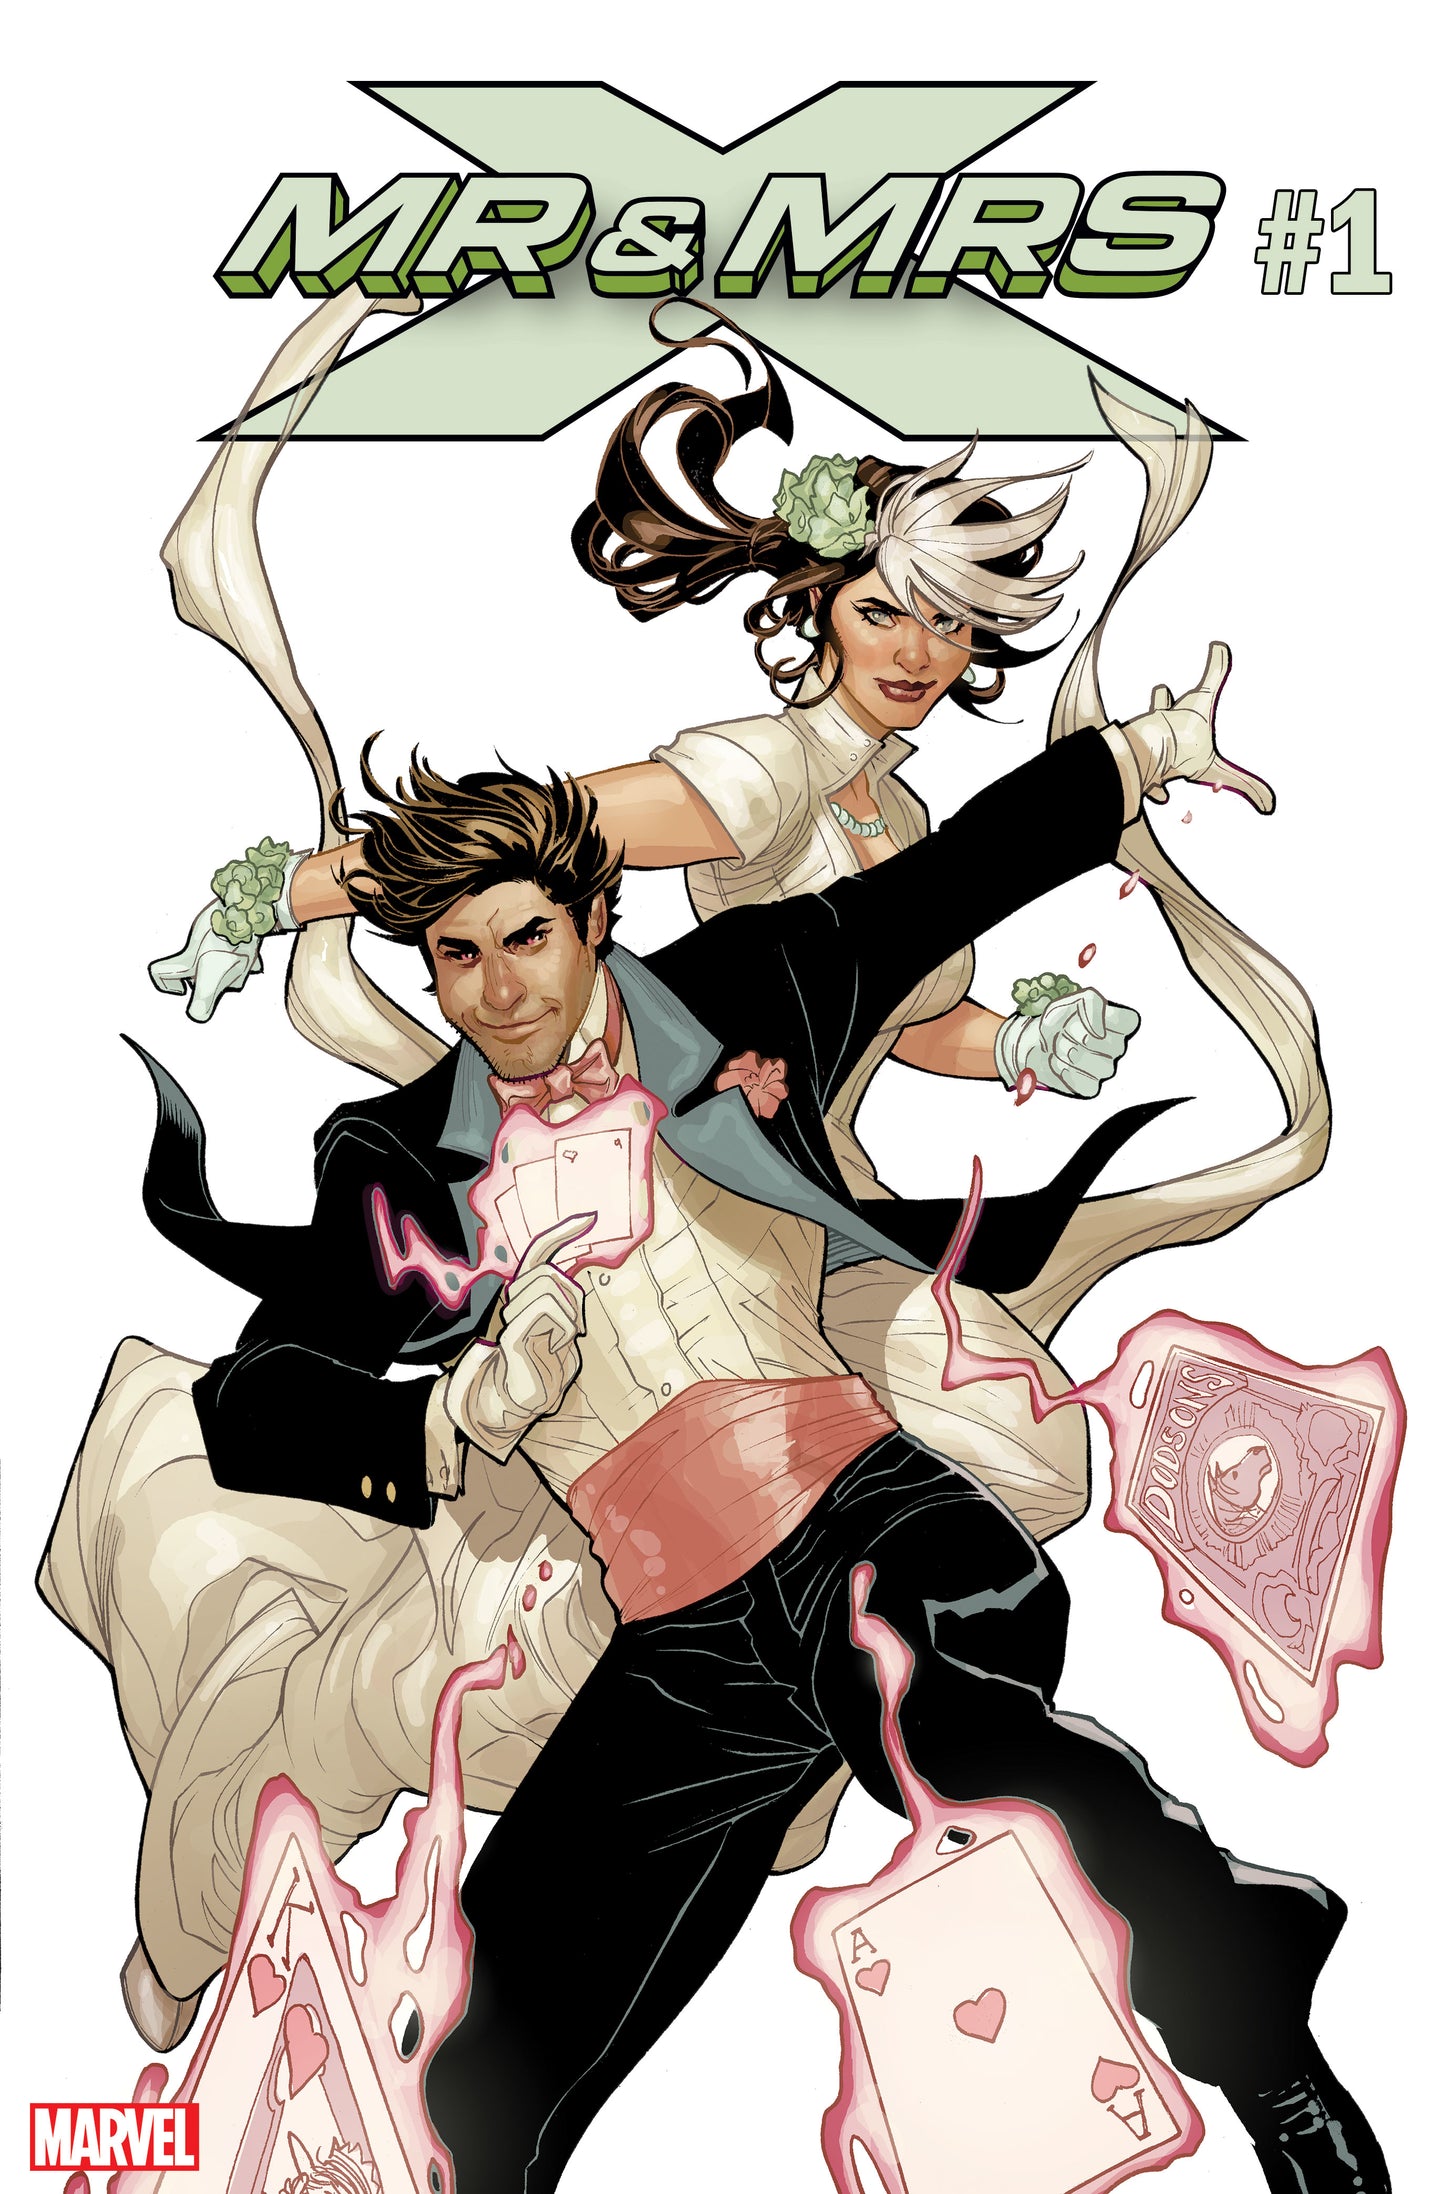 MR AND MRS X #1 COVER